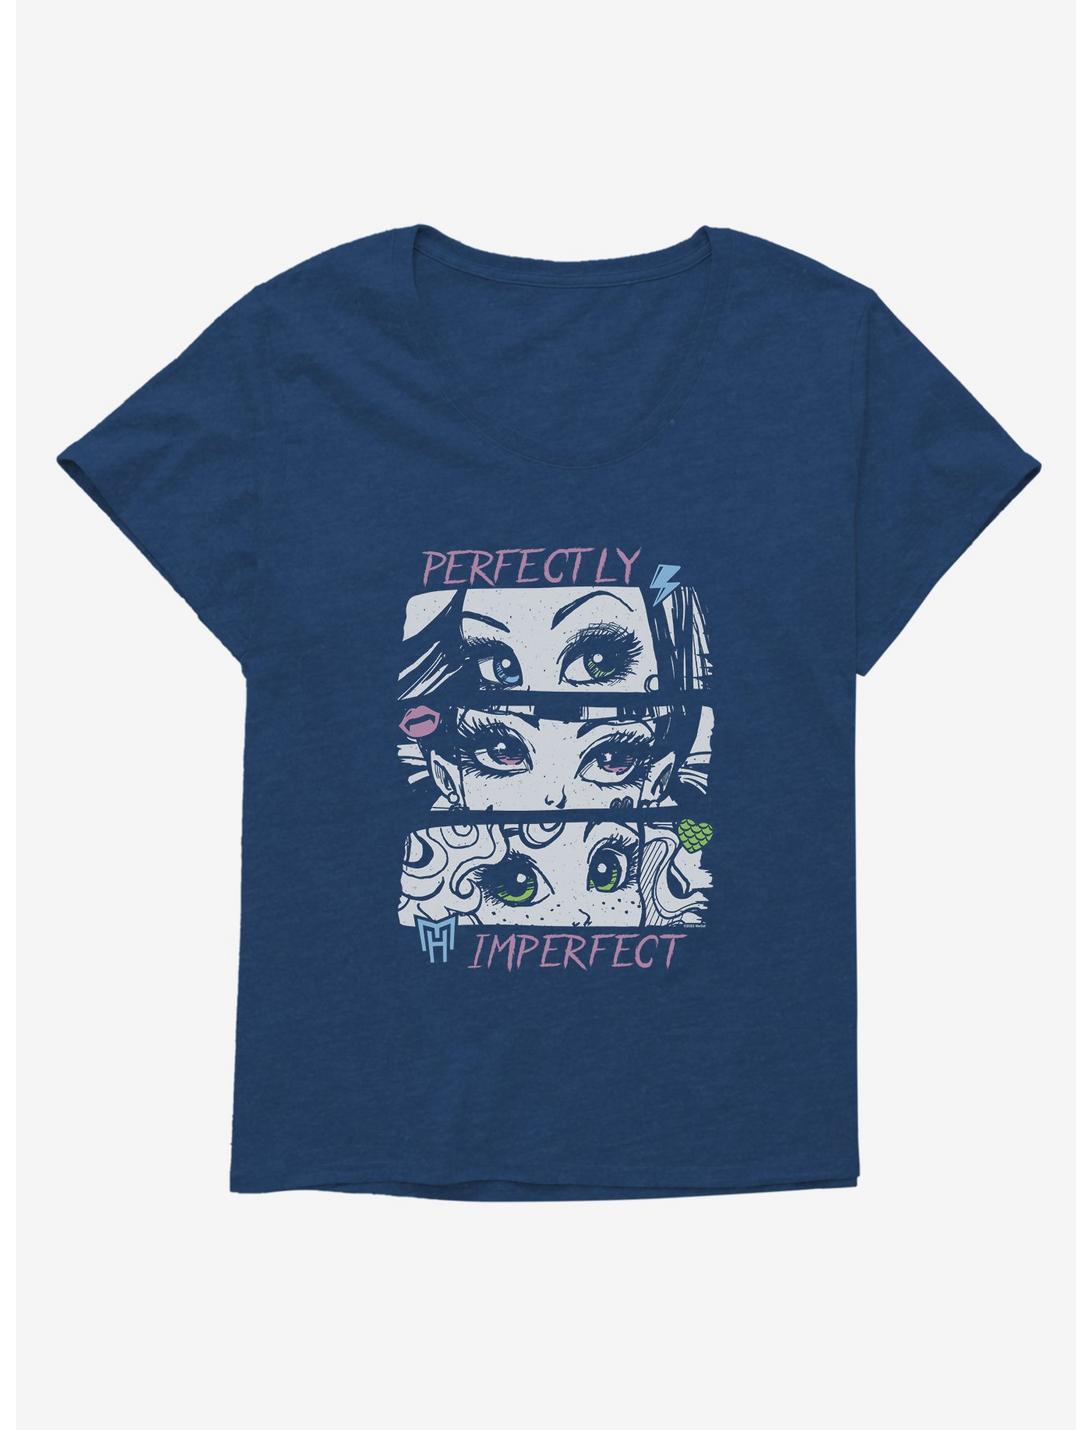 Monster High Perfectly Imperfect Girls T-Shirt Plus Size, , hi-res